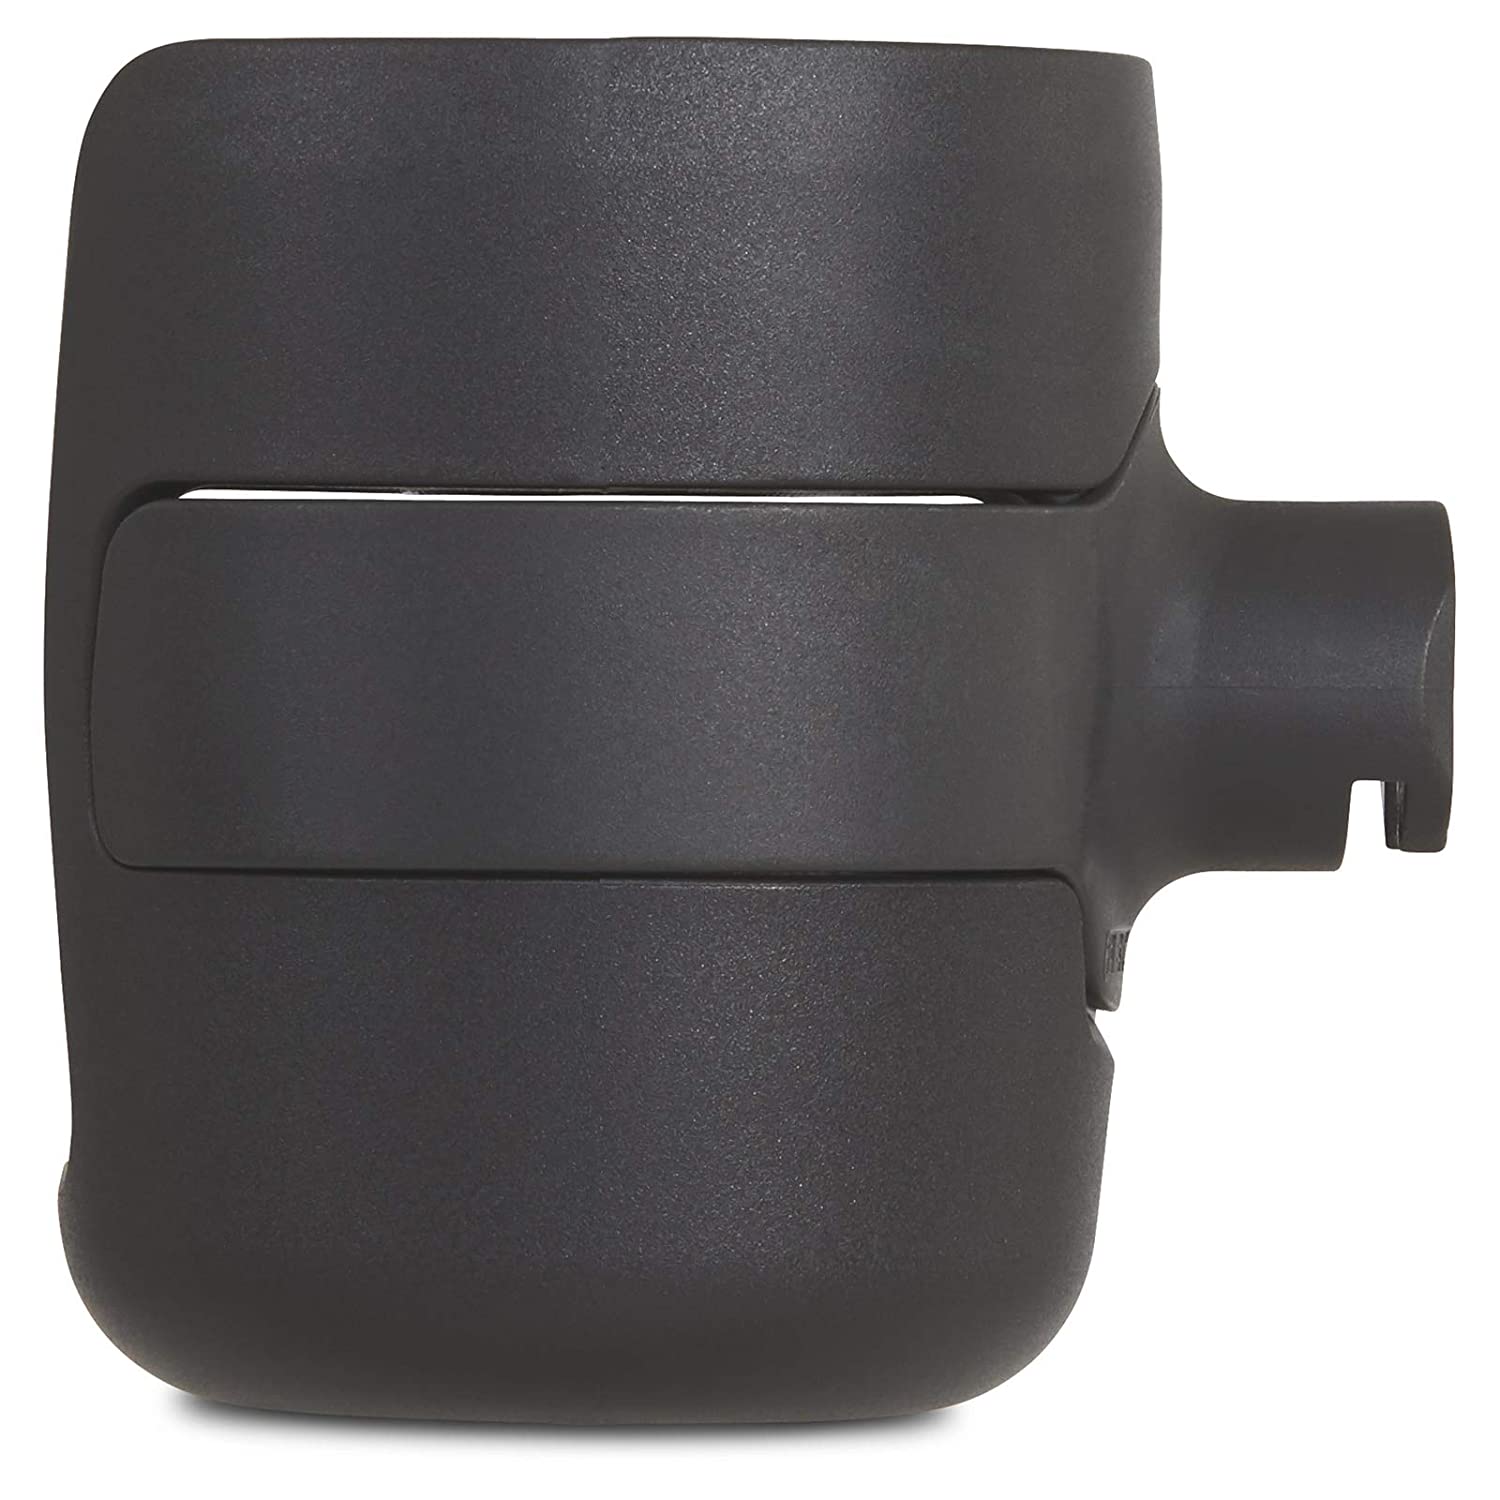 ABC Design 2020 Cup Holder for Pushchair Cloud